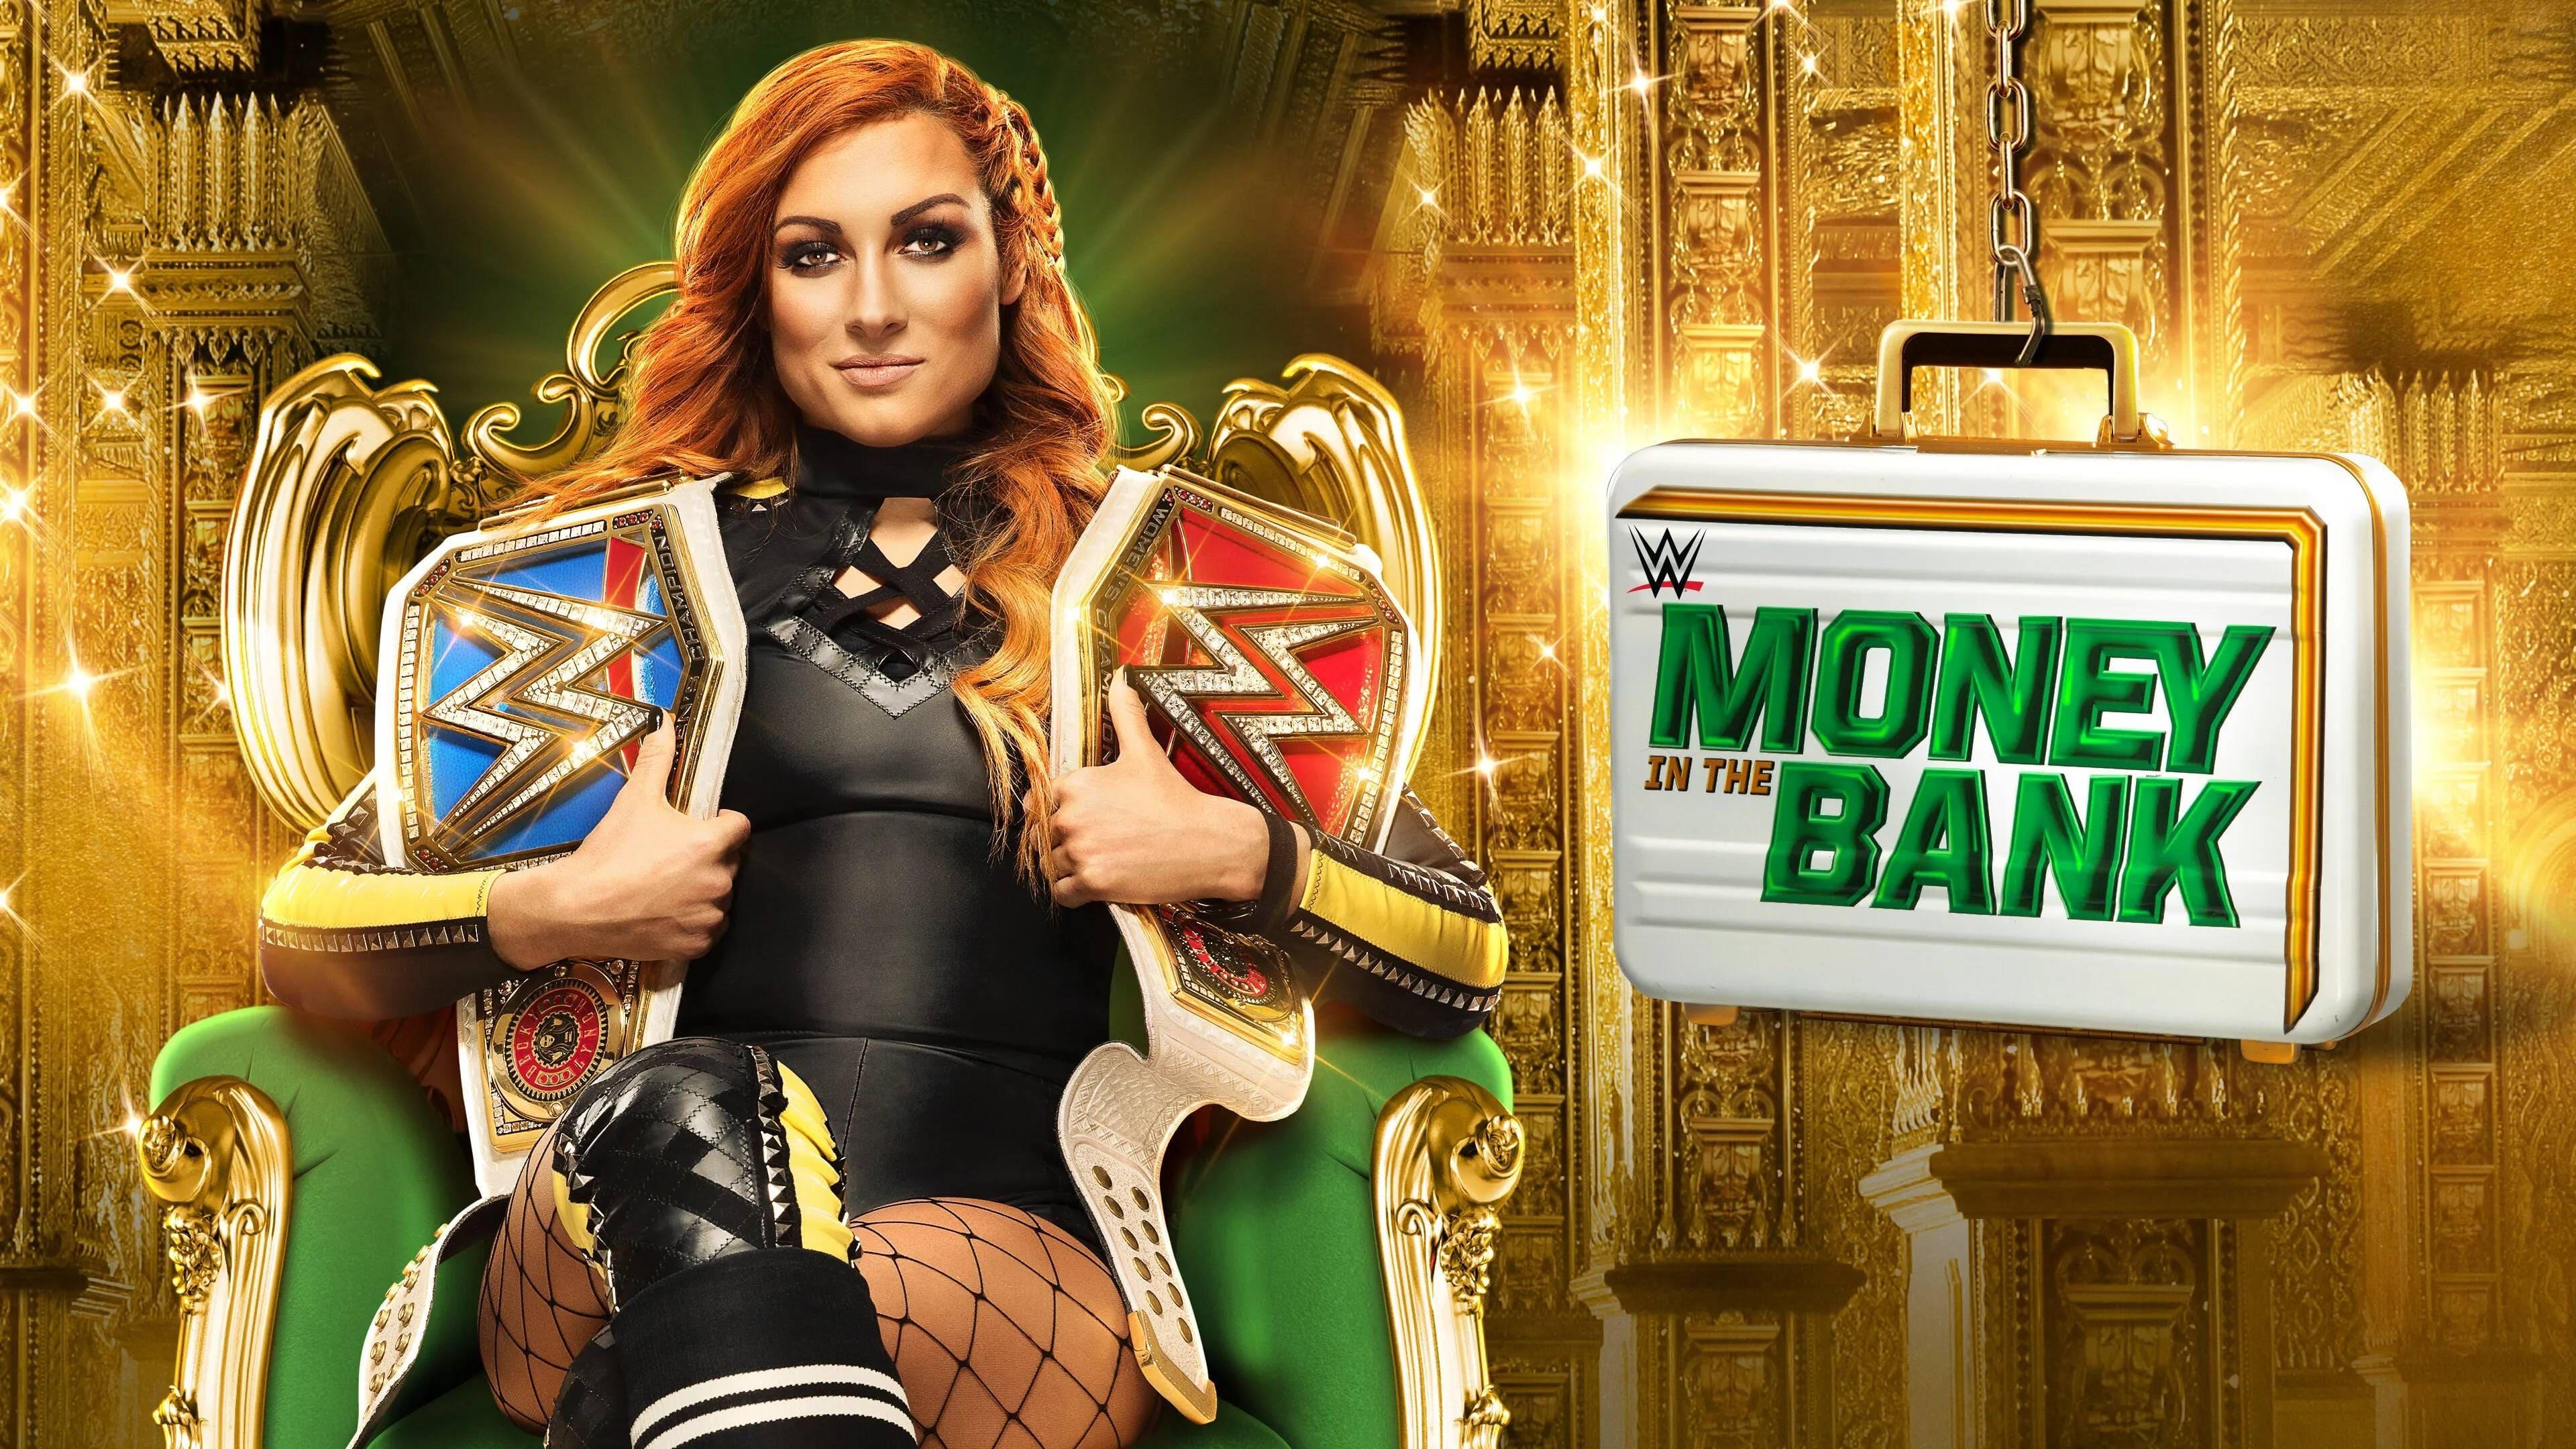 WWE Money in the Bank 2019 backdrop